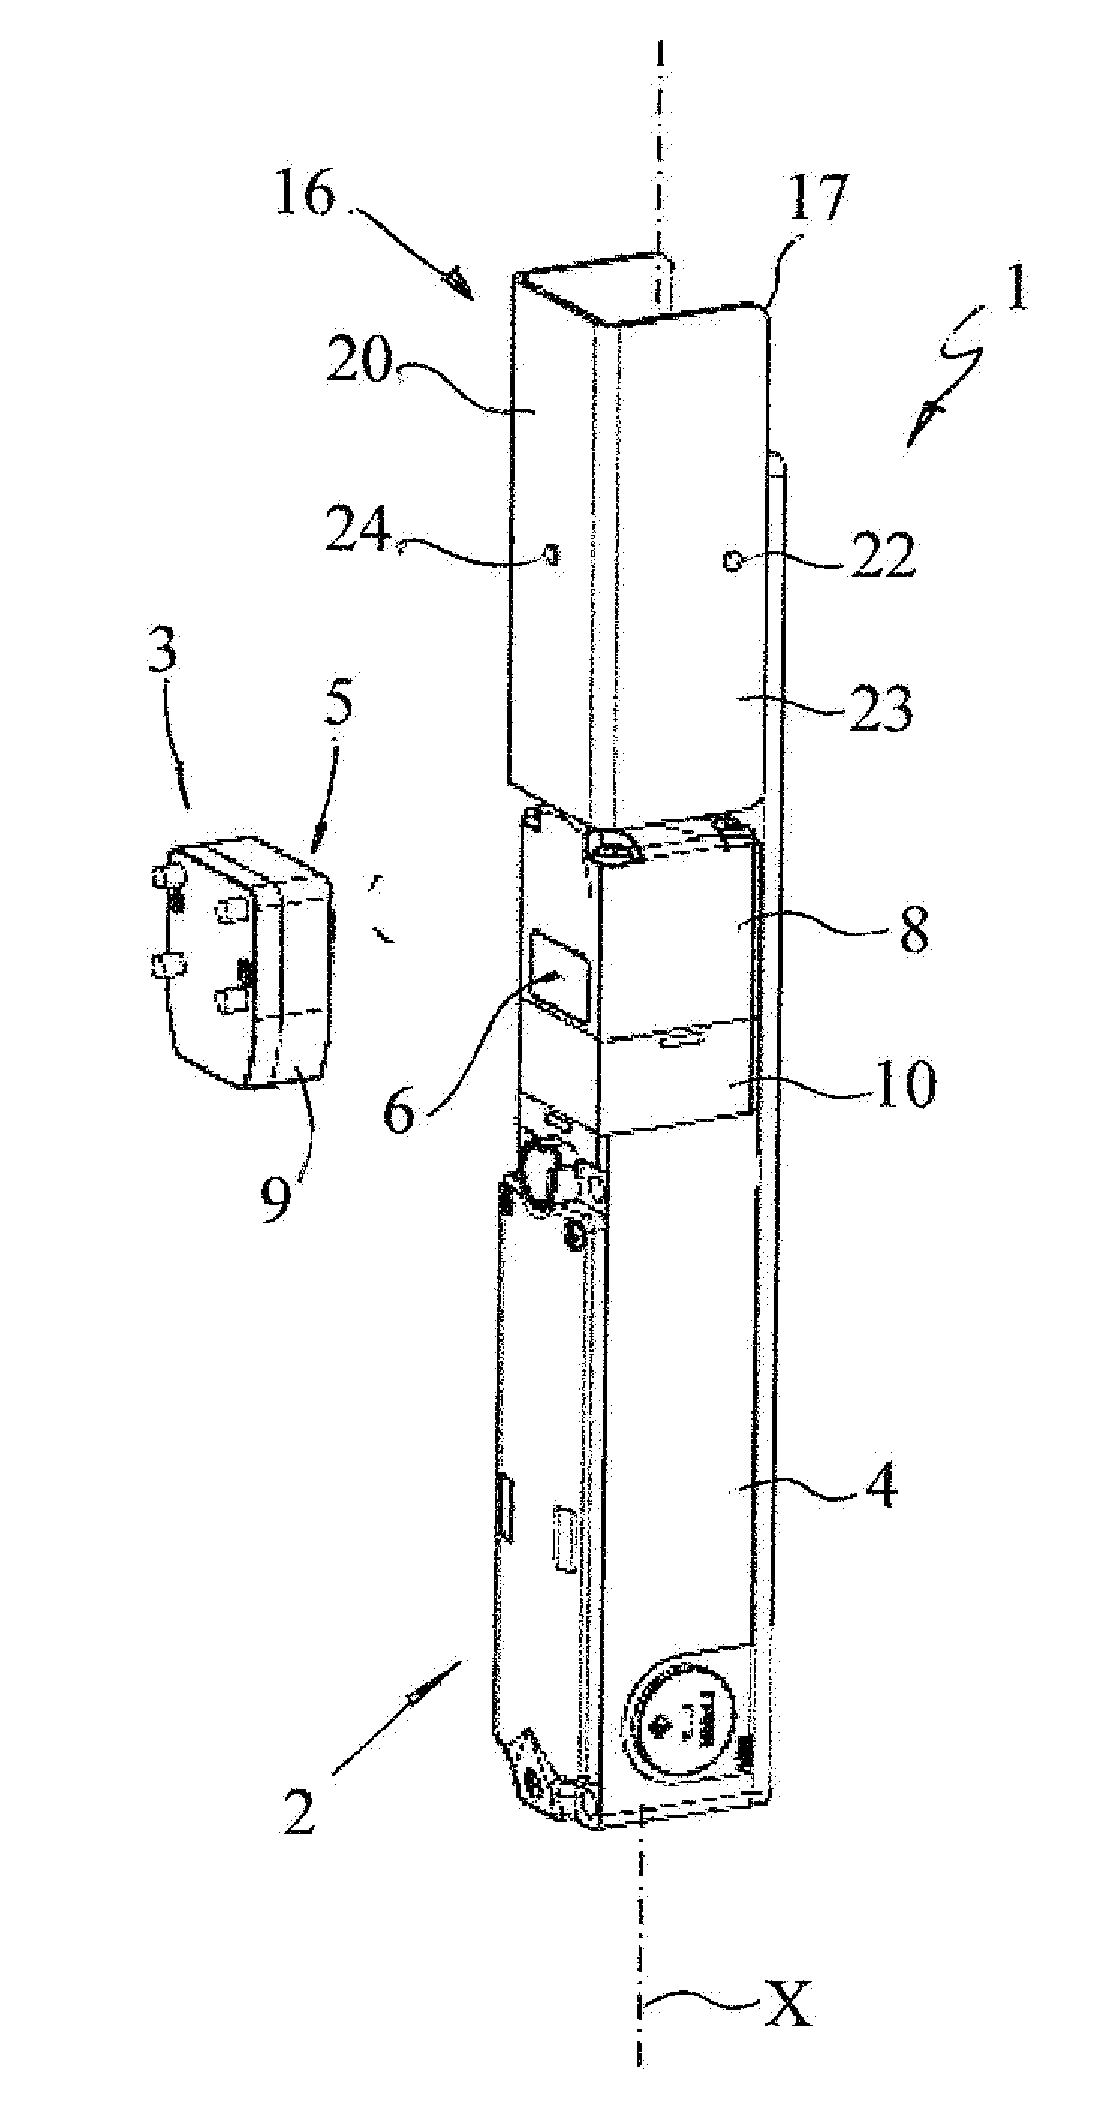 Safety Switch with Lock-Out Device